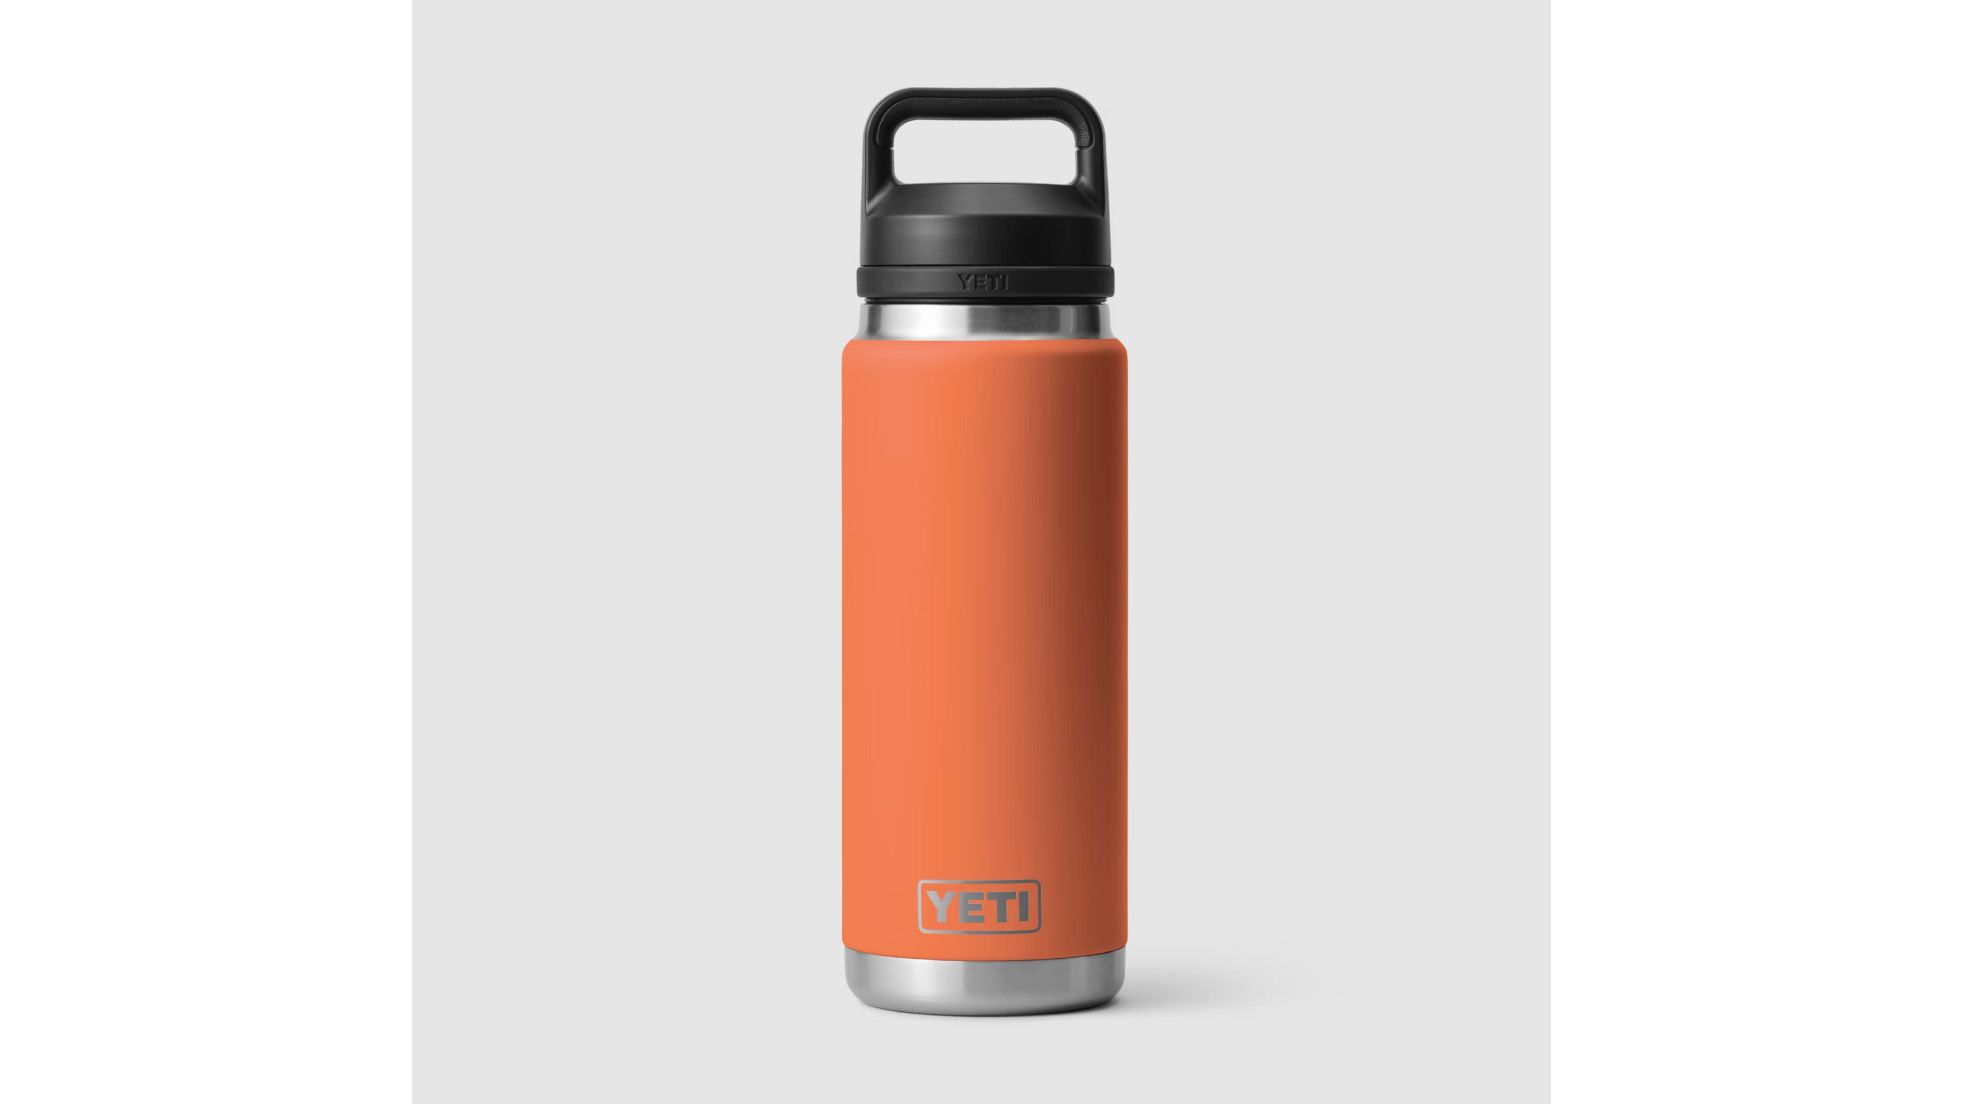 New Yeti Gear and Colors for Spring 2022 - Game & Fish